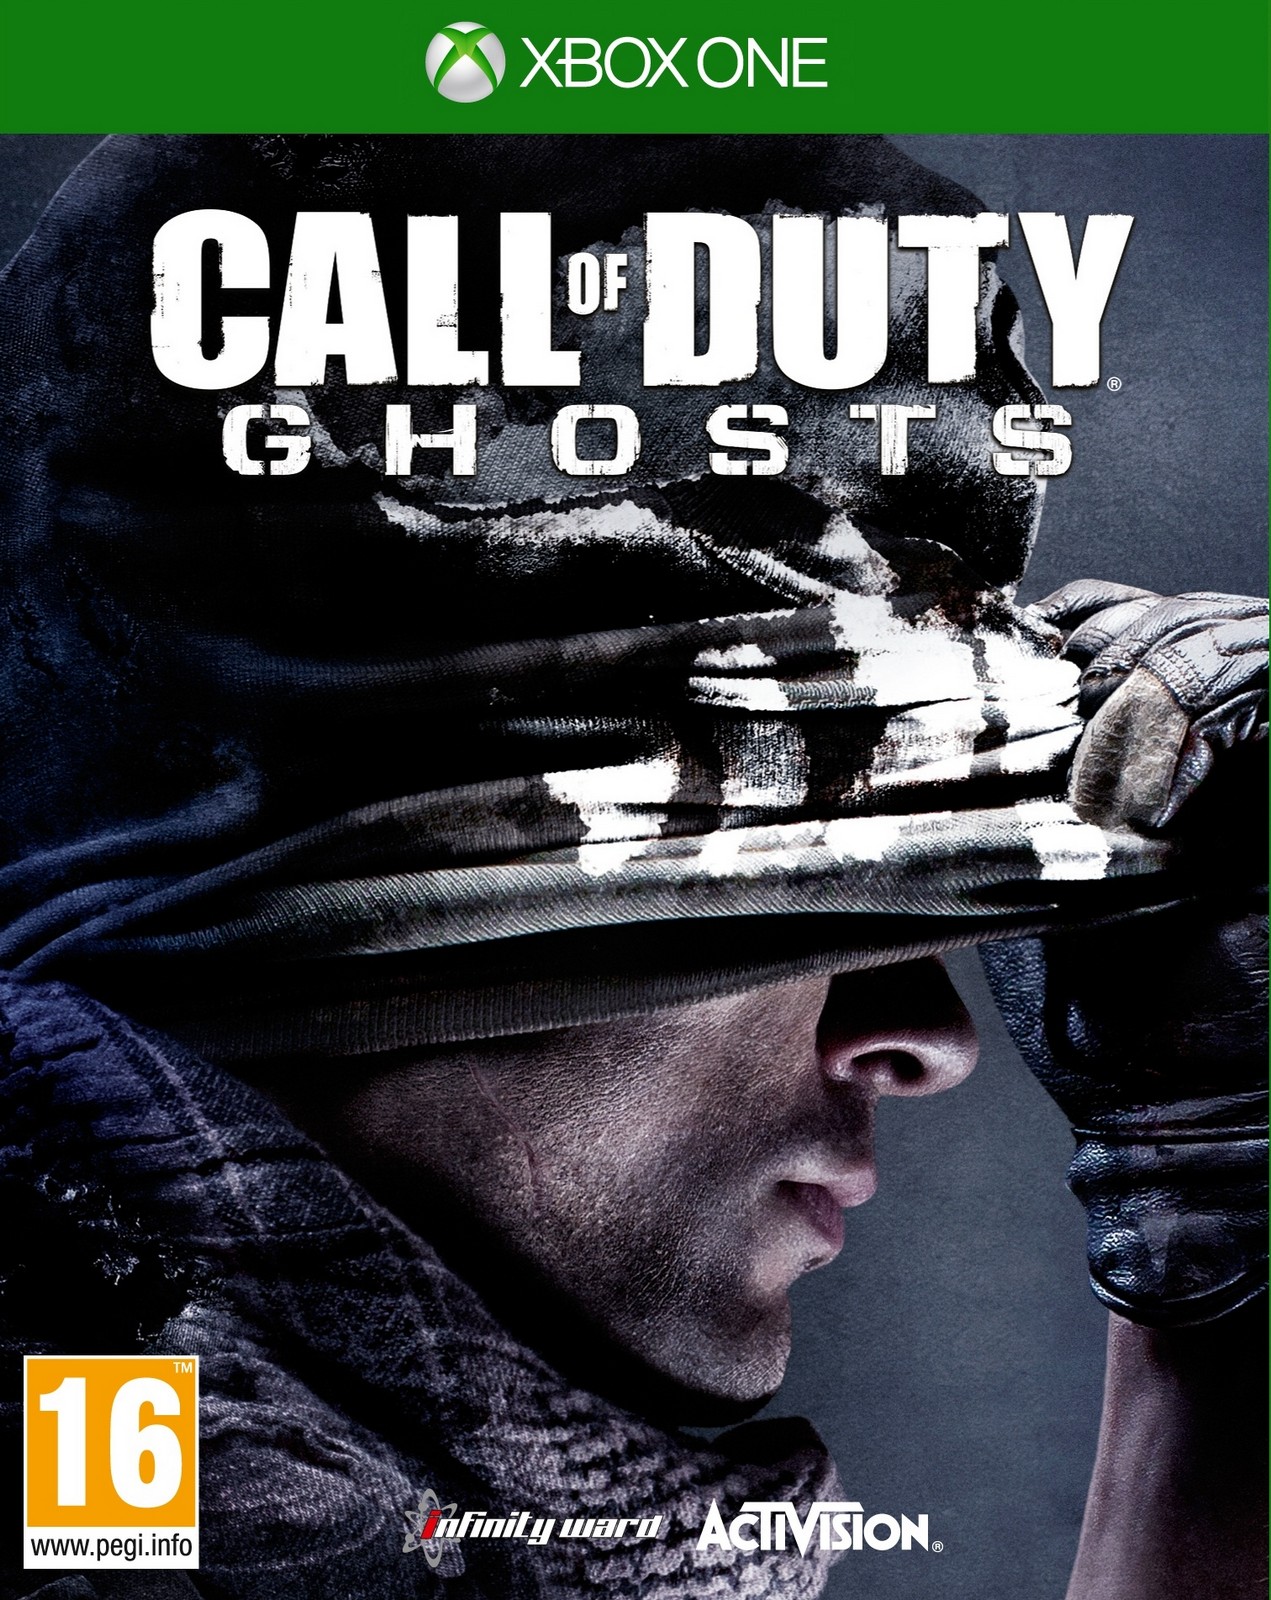 Xbox One Call of Duty: Ghosts